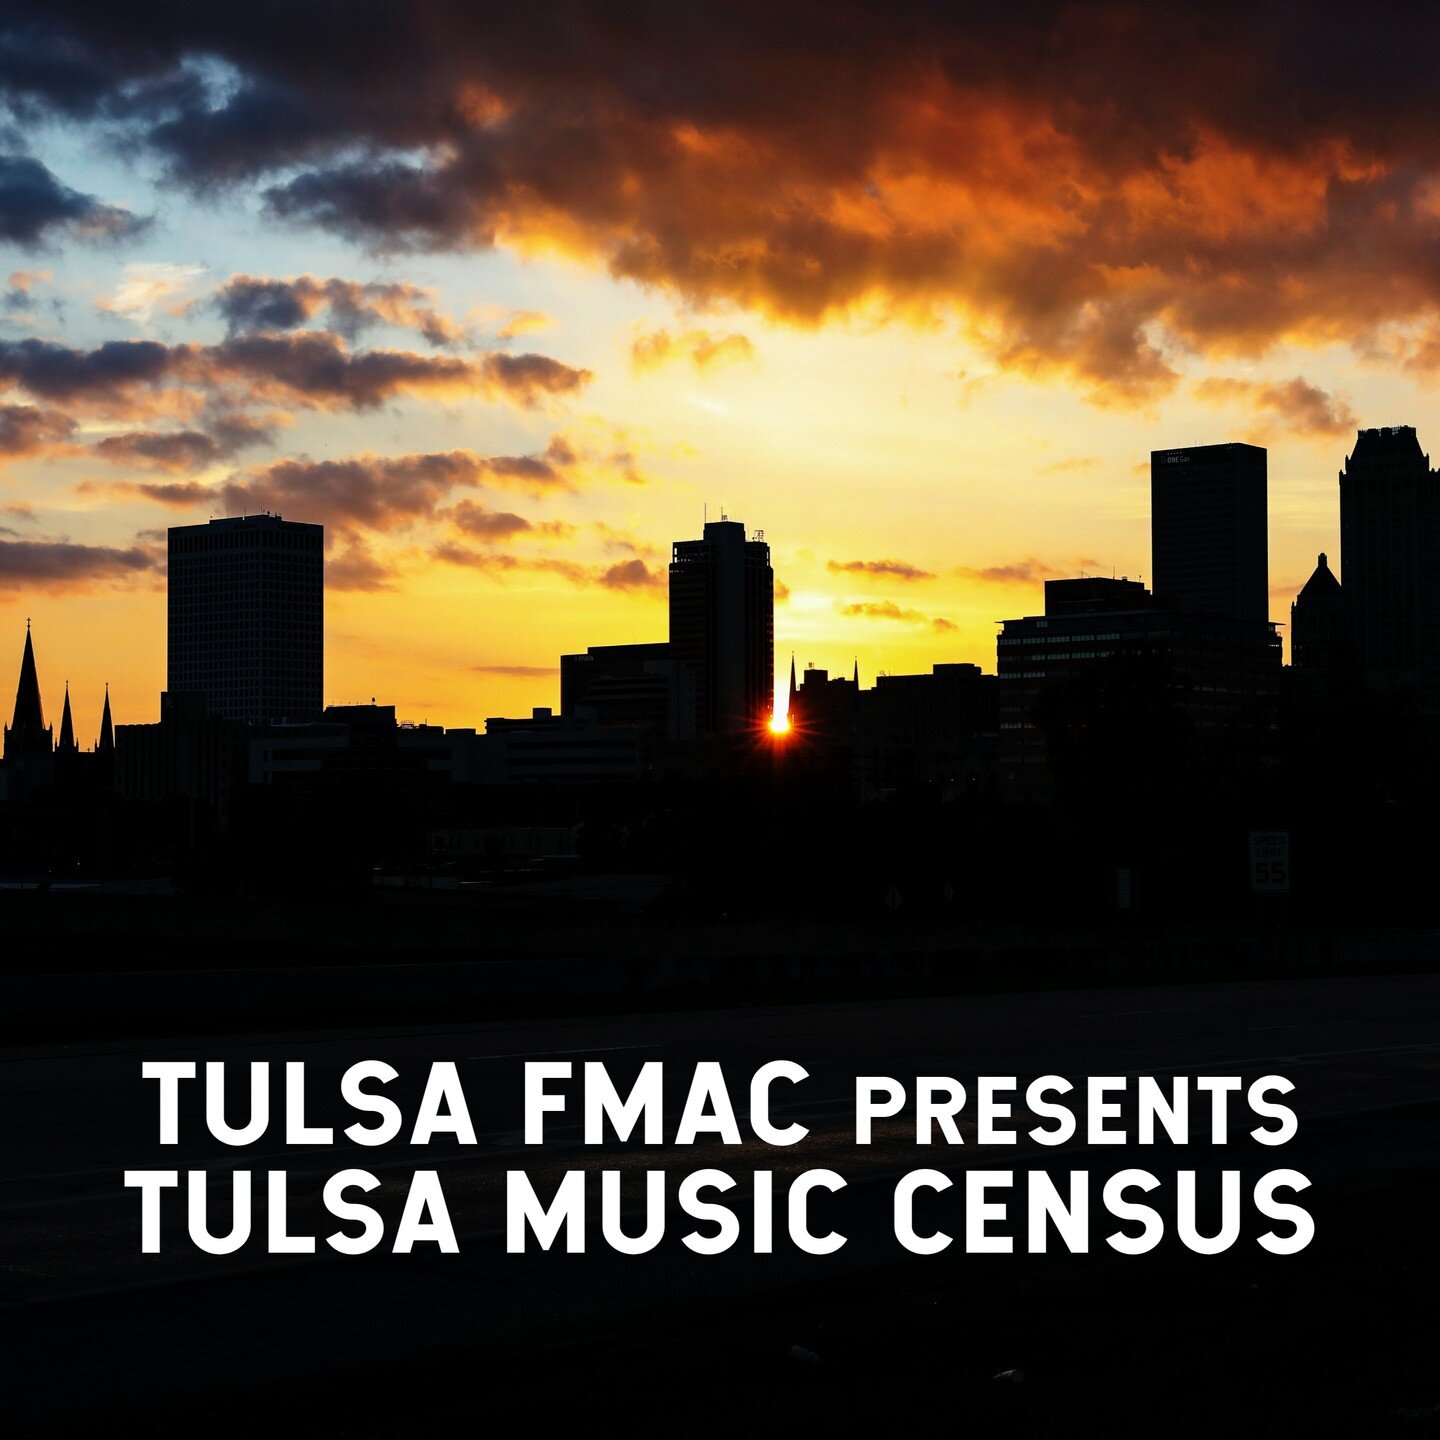 Hey Everyone! We joined with @tulsafmac as a Community Engagement Partner to help spread the word about their Tulsa Music Scene Census. They are looking for feedback from anyone involved in Tulsa music; performers, service staff, venue owners, bookin